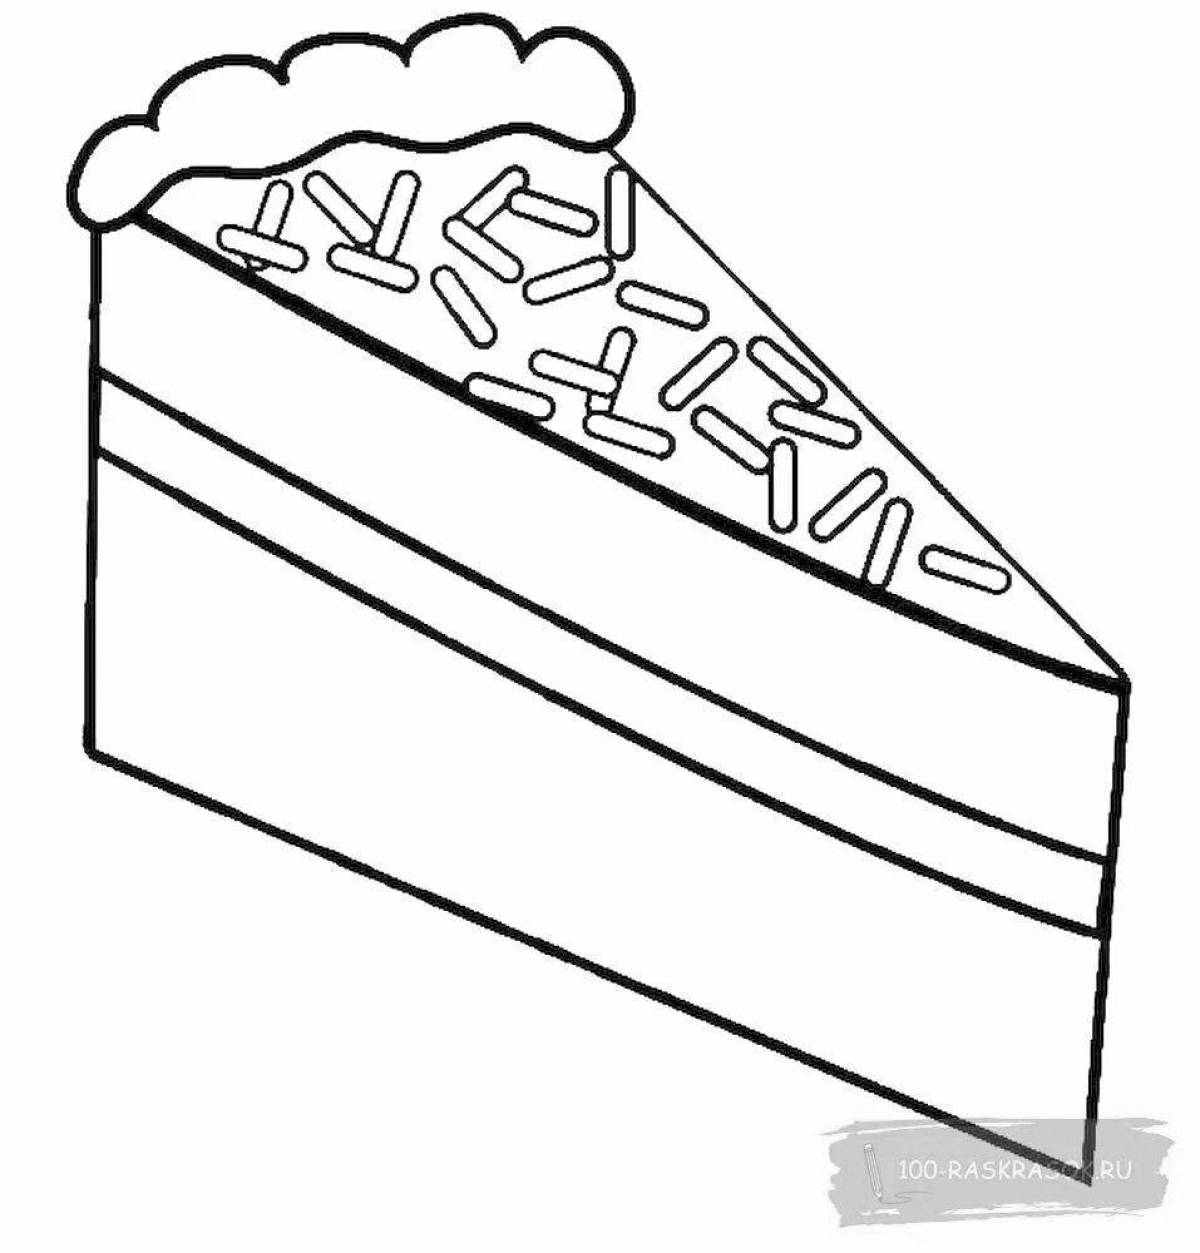 Playful candy bar coloring page for kids